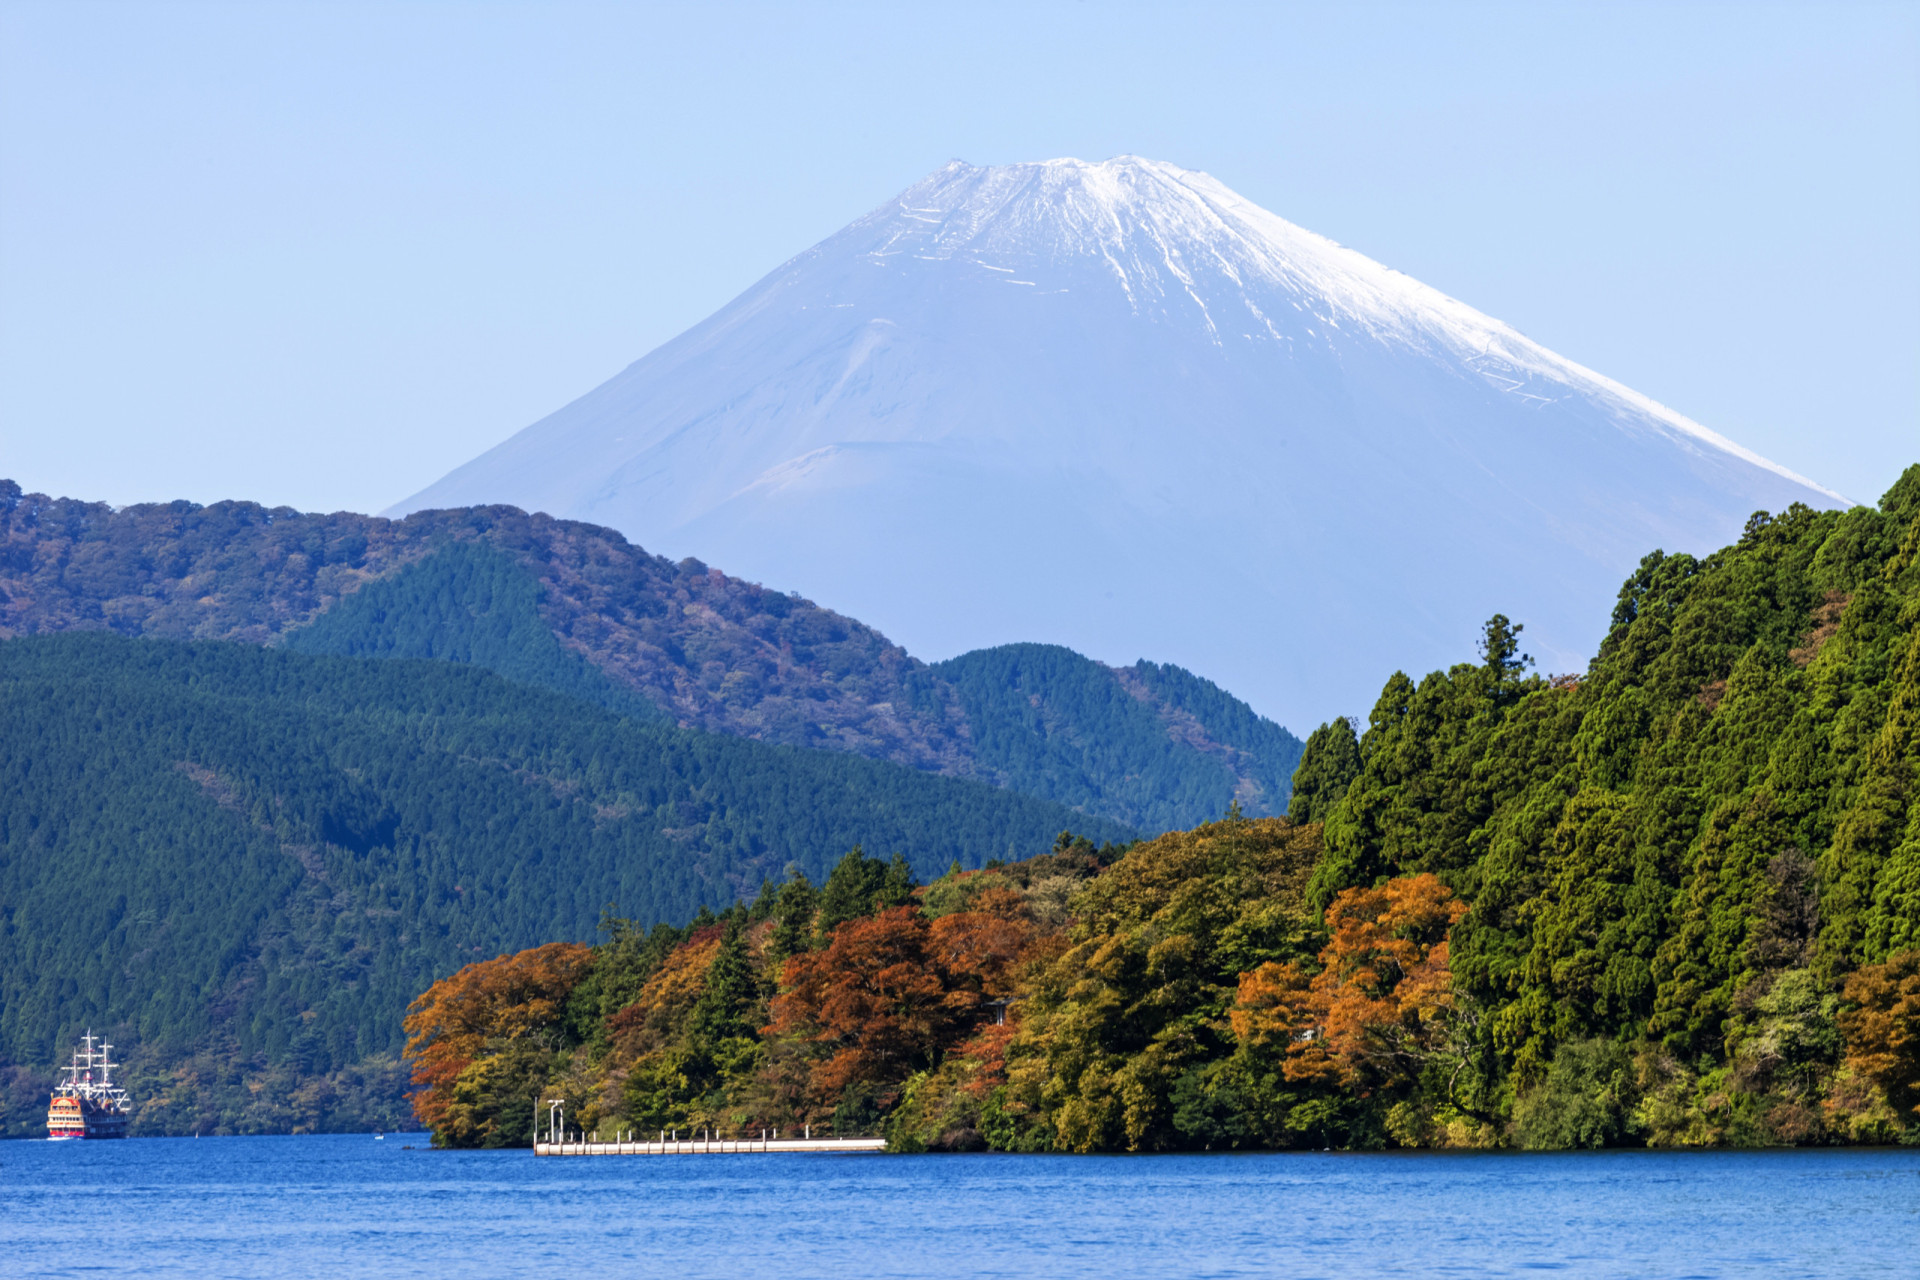 <p>This luxurious tour takes you to some of the most beautiful locations in Japan. From Tokyo to Kyoto, you'll experience majestic Japanese mountains and the gorgeous cherry blossoms.</p><p>You may also like:<a href="https://www.starsinsider.com/n/470597?utm_source=msn.com&utm_medium=display&utm_campaign=referral_description&utm_content=555492en-us"> The most shocking lies ever told by celebrities</a></p>